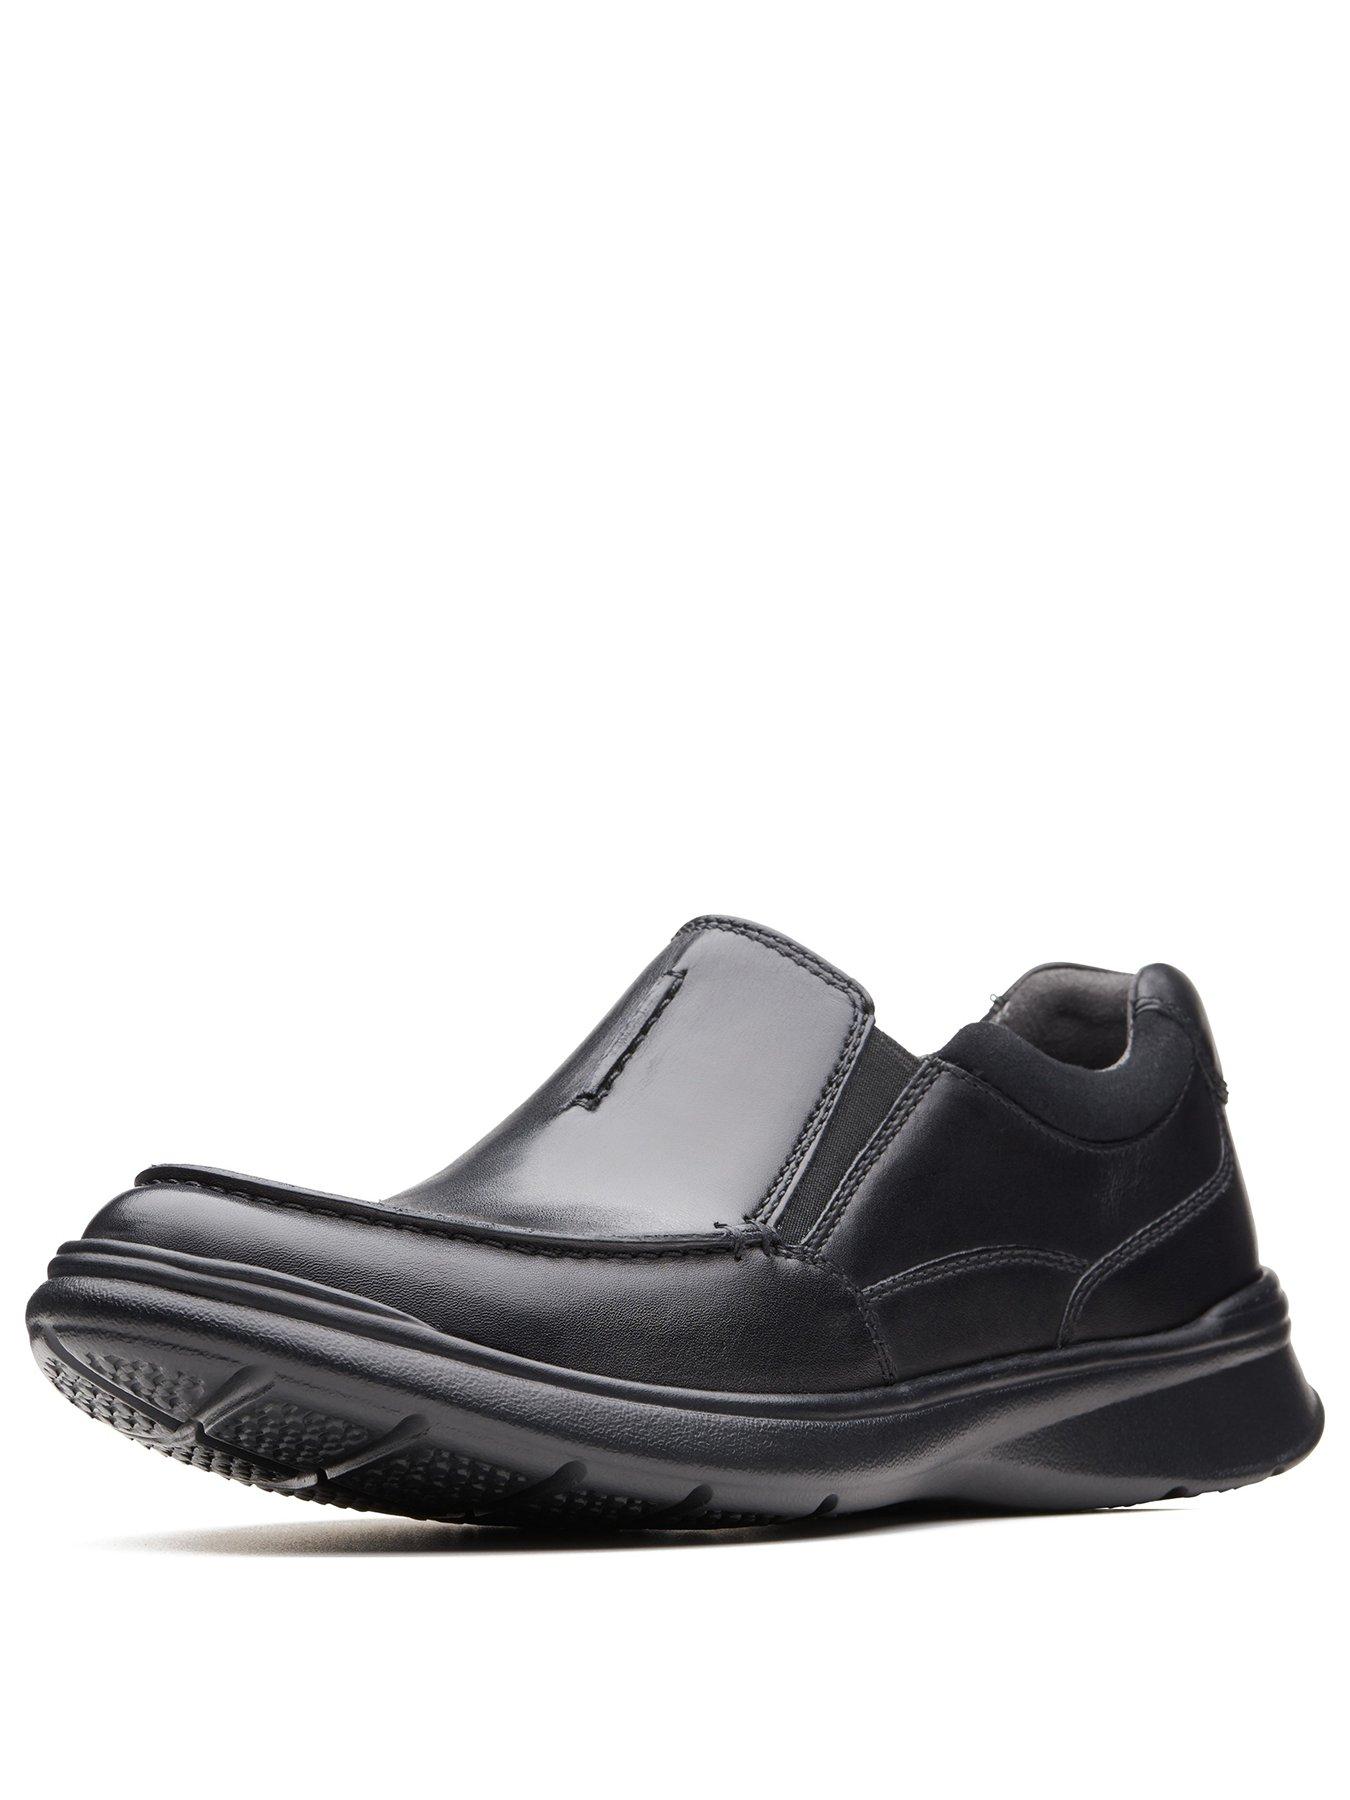  Cotrell Free Loafer Shoes - Black